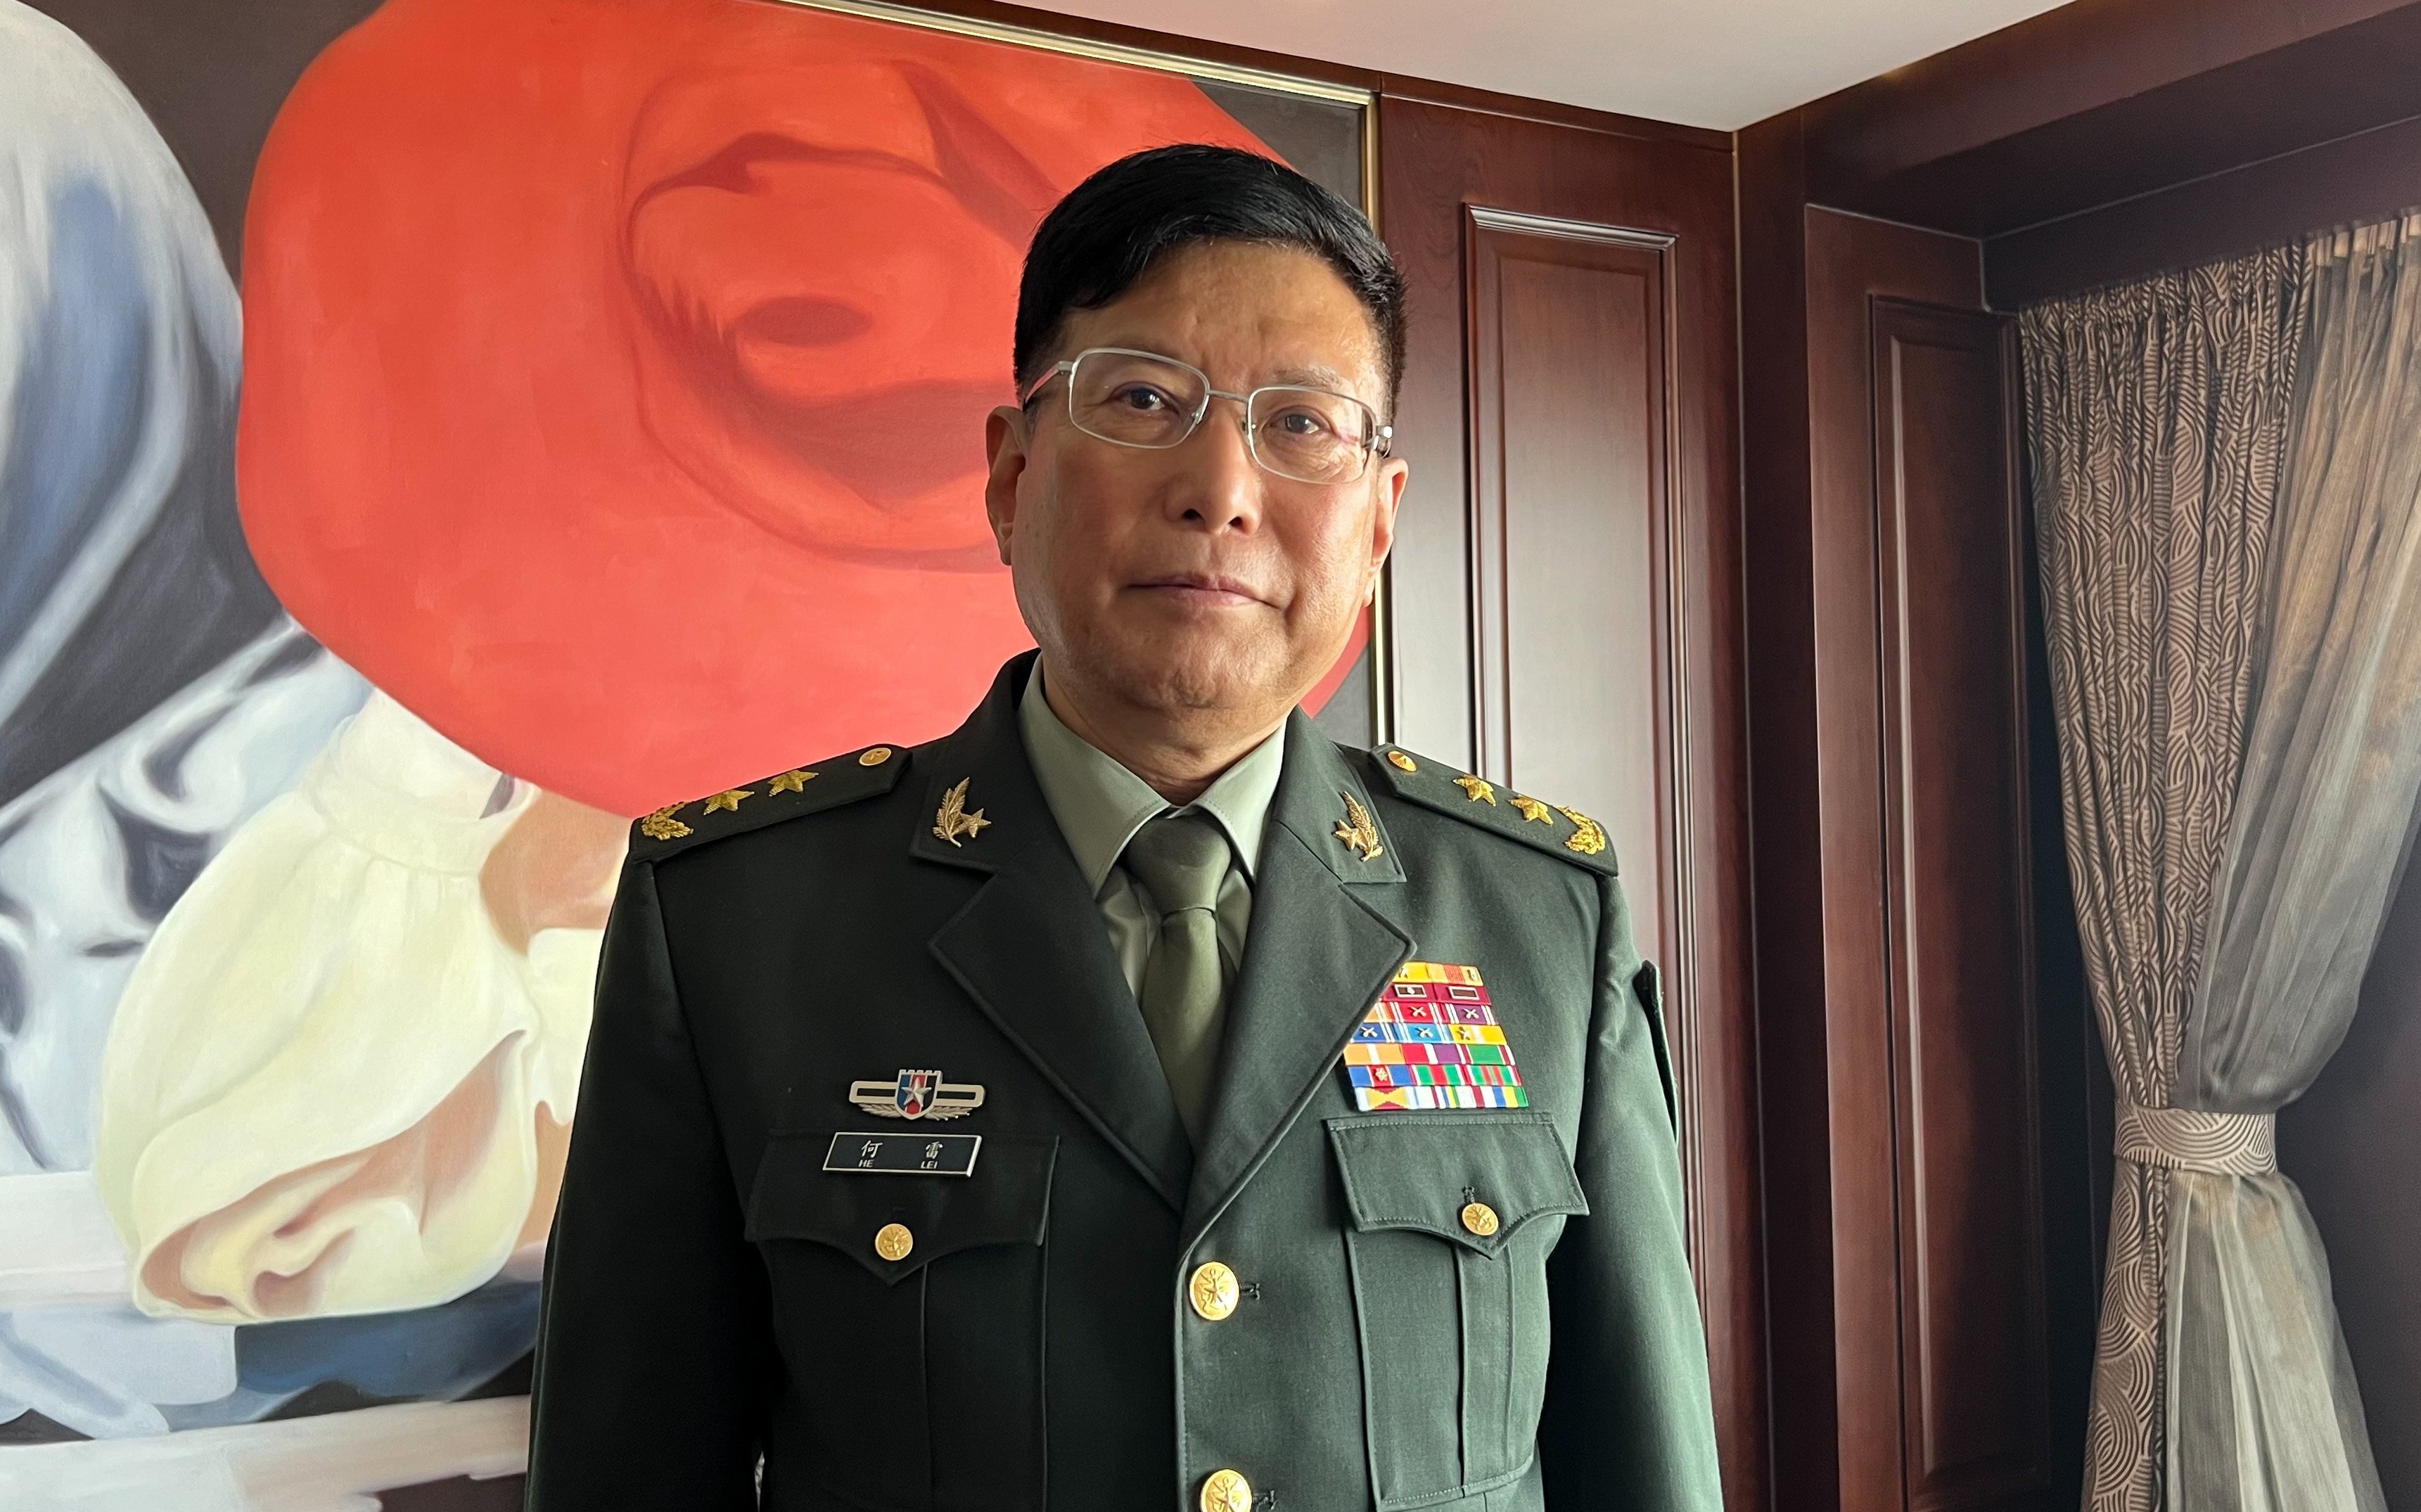 PLA Lieutenant General He Lei is one of two Chinese military officials known to have spoken with members of the US delegation at the Xiangshan Forum in Beijing. Photo: SCMP/ Jack Lau